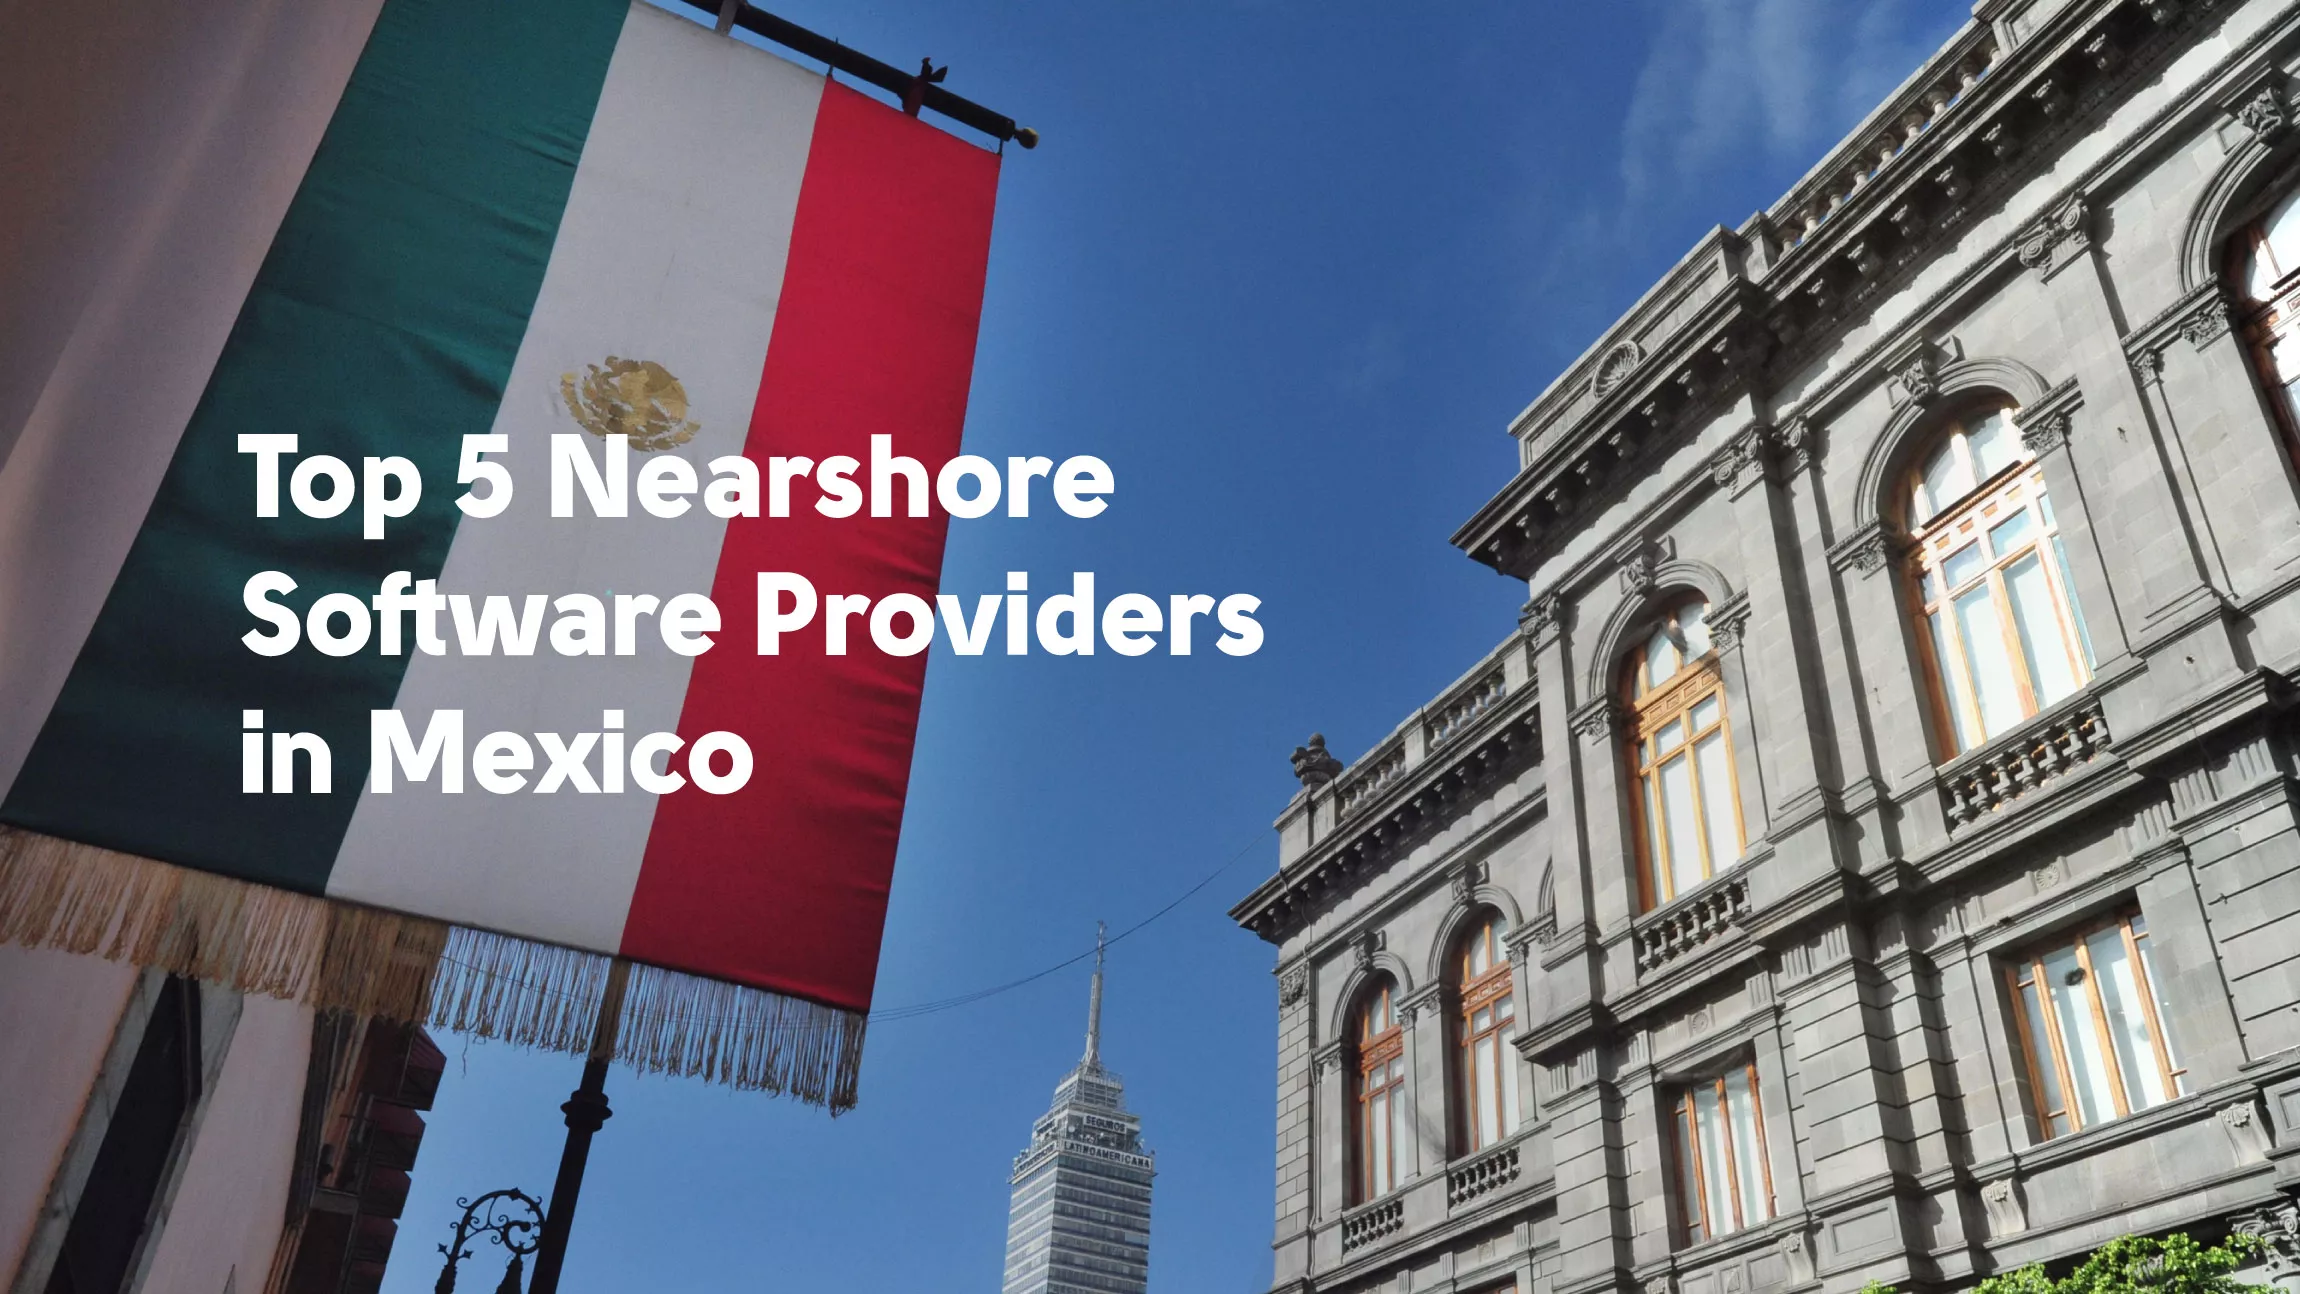 Top 5 Nearshore Software Providers in Mexico